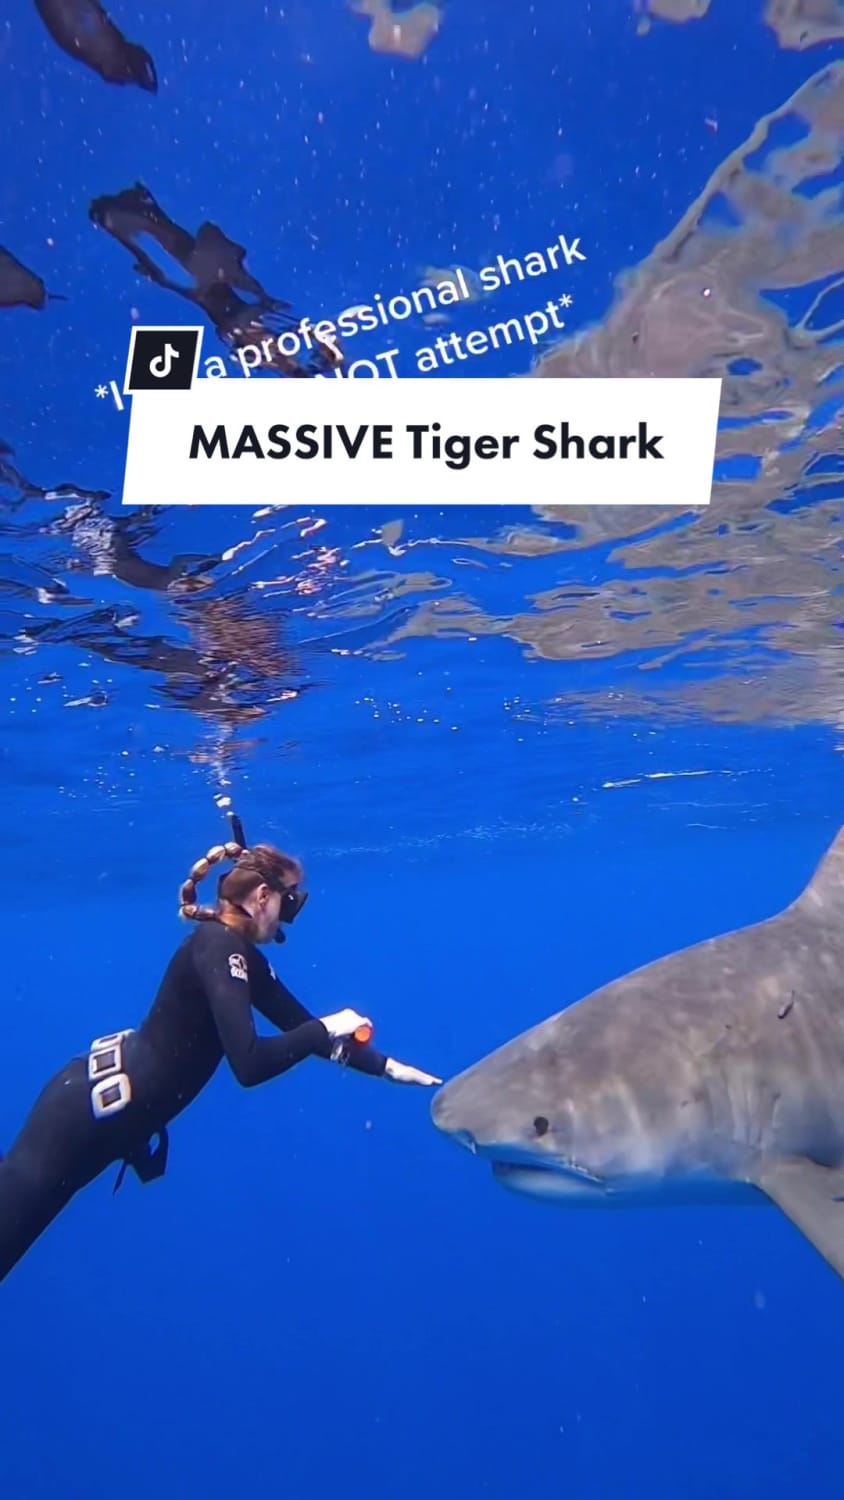 ocean shark tigershark thalassophobia sharkdiver deepwater 📷: eringggabrielle The thing that makes me feel the happiest on this earth is seeing this huge face approach me🦈 Most videos don’t truly demonstrate how large these sharks are so I was so excited to see this one be pretty accurate with sizing! *Please do not dive with sharks without a trained professional*